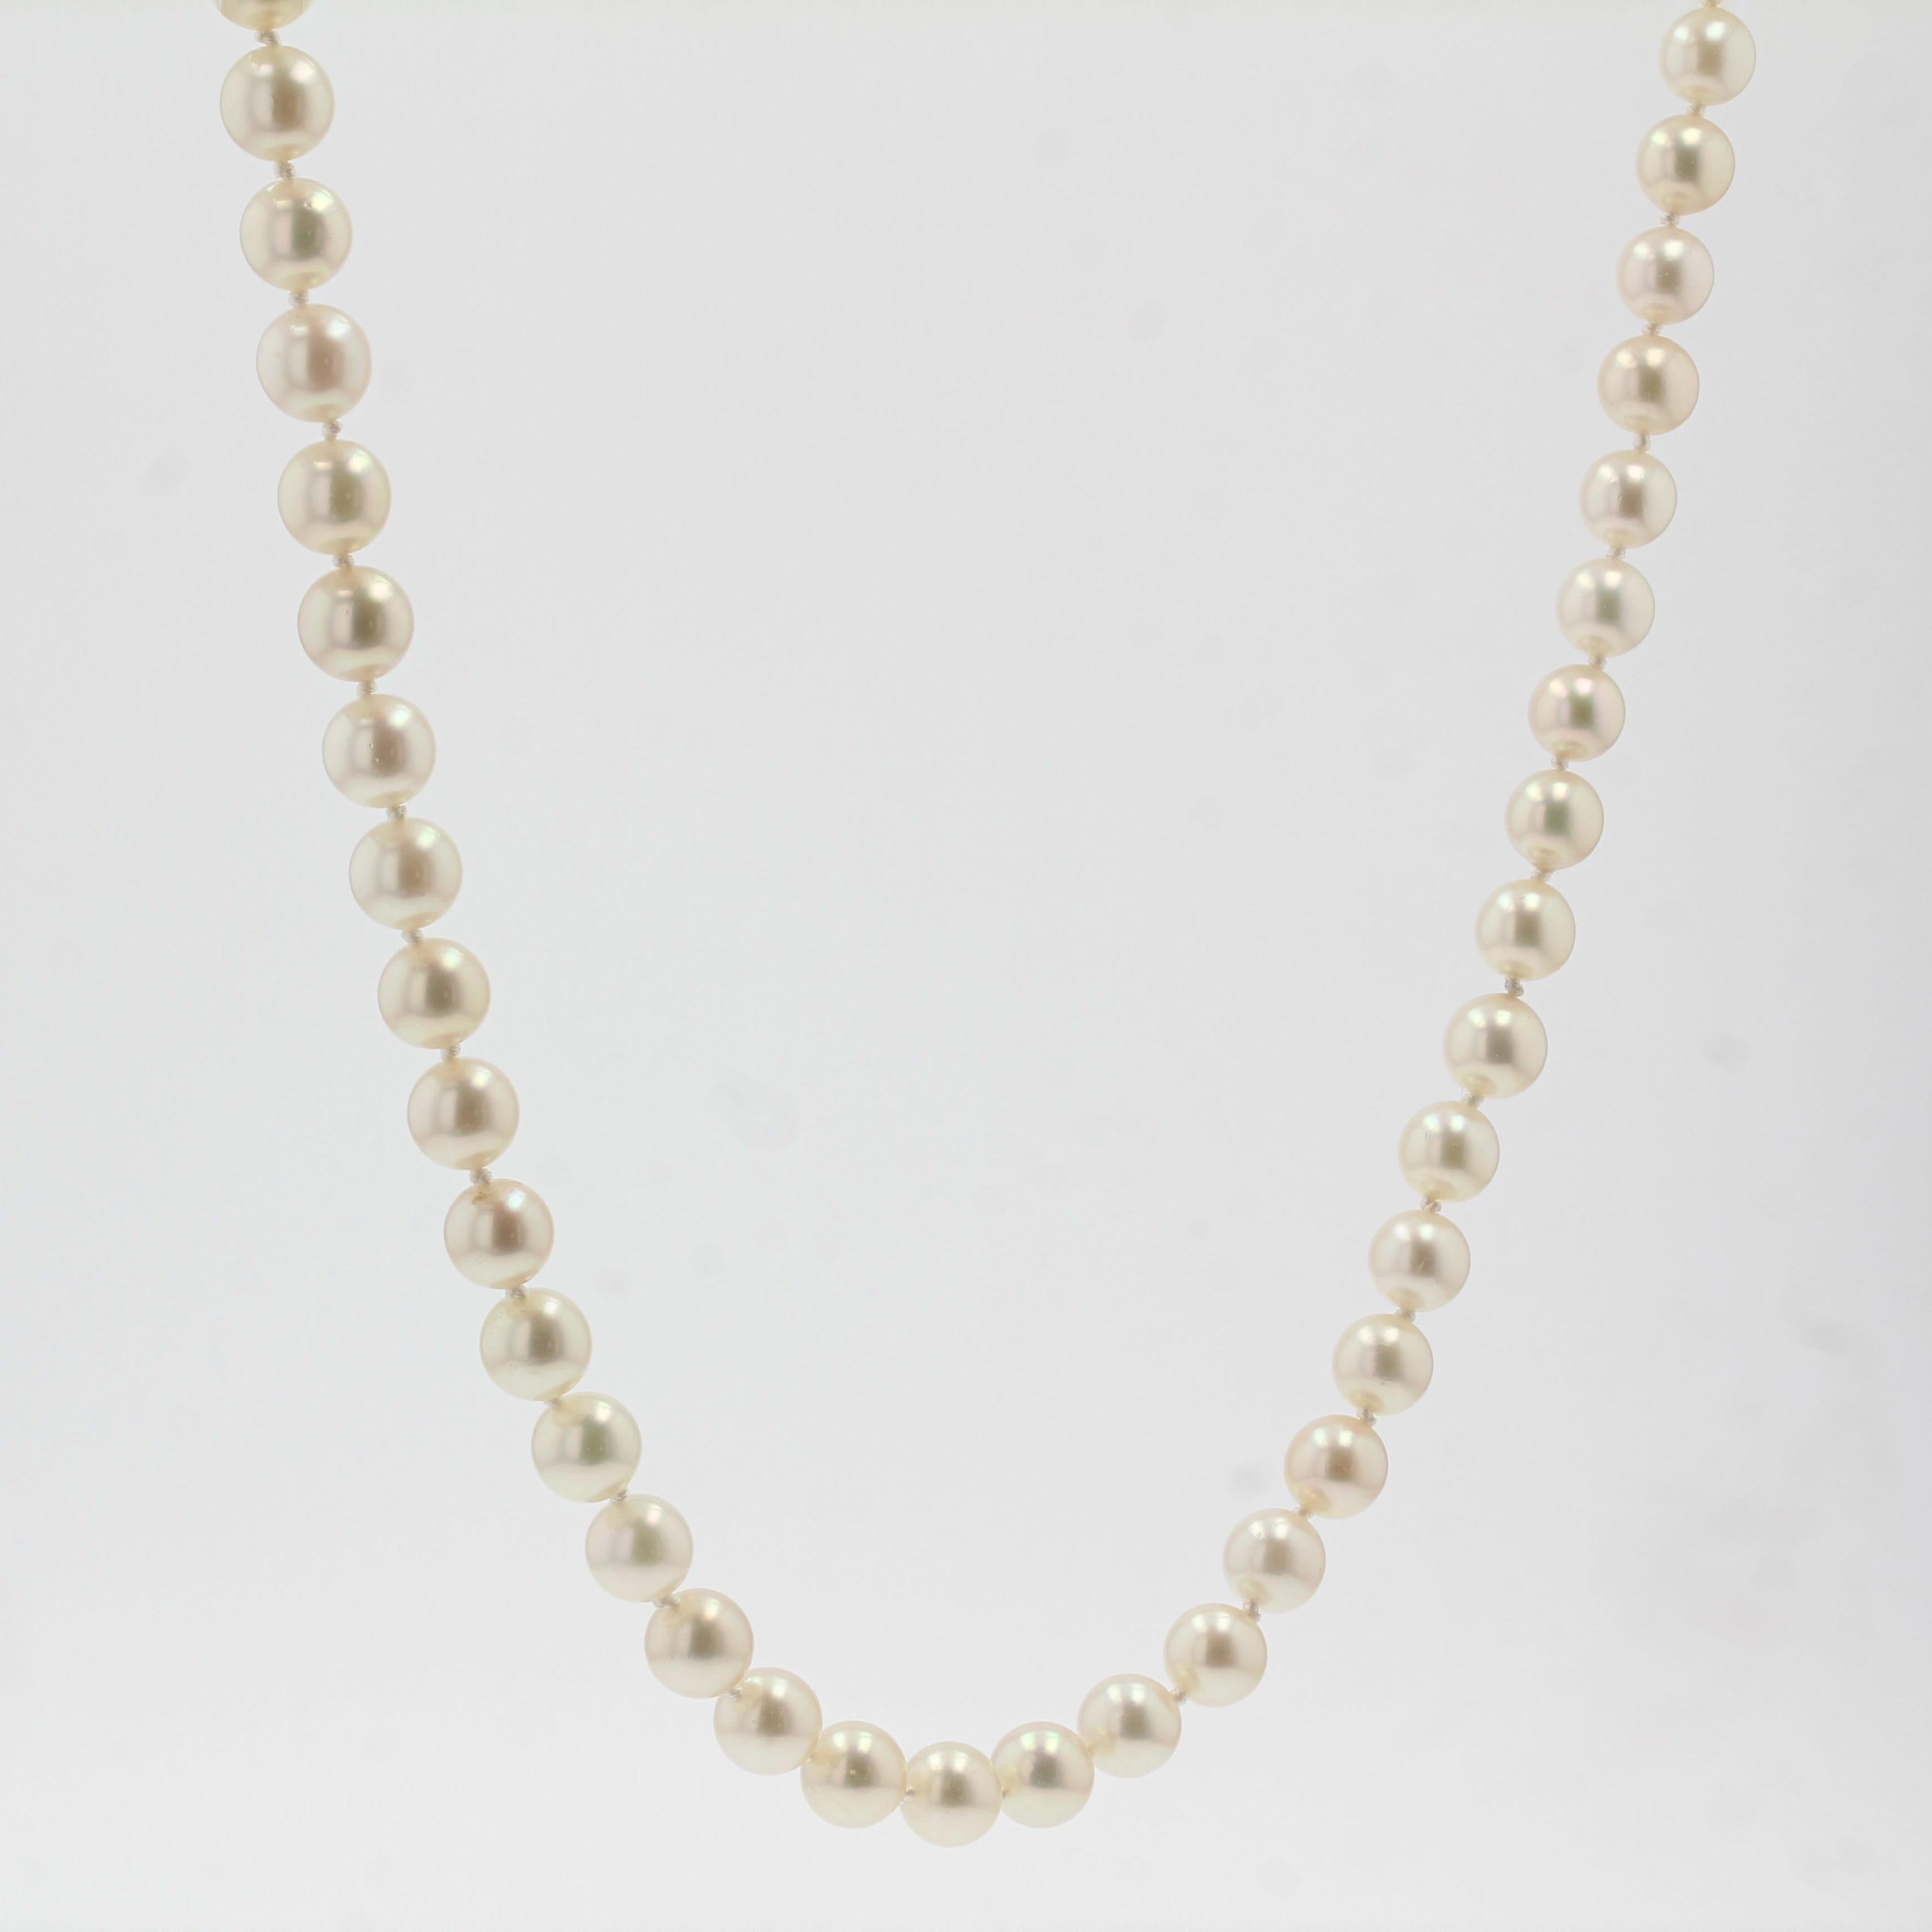 value of 50 year old pearl necklace